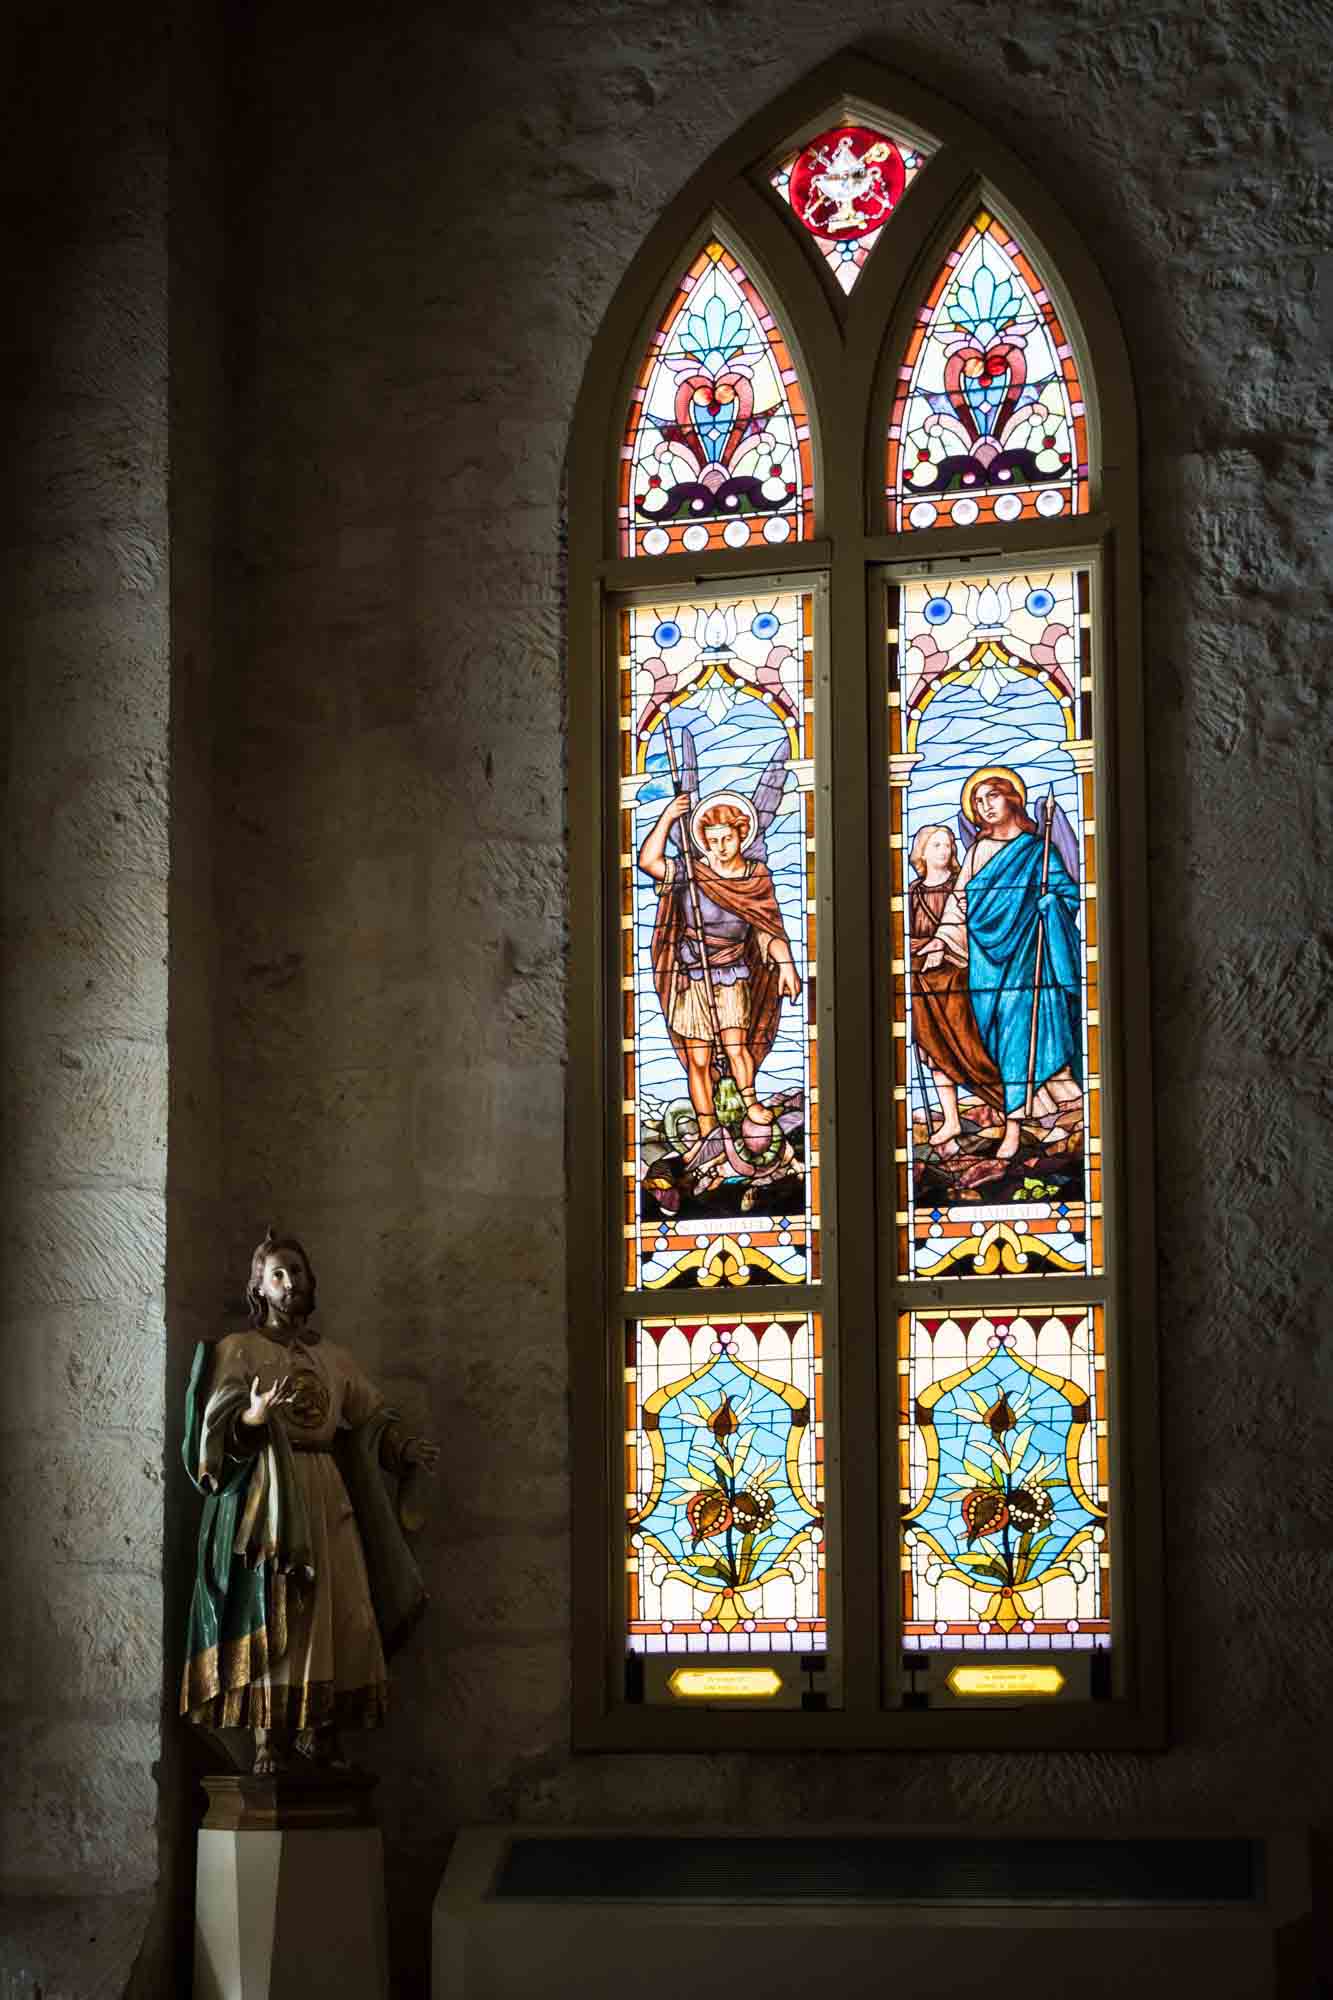 Colorful stained glass window and religious statue in the San Fernando Cathedral in San Antonio